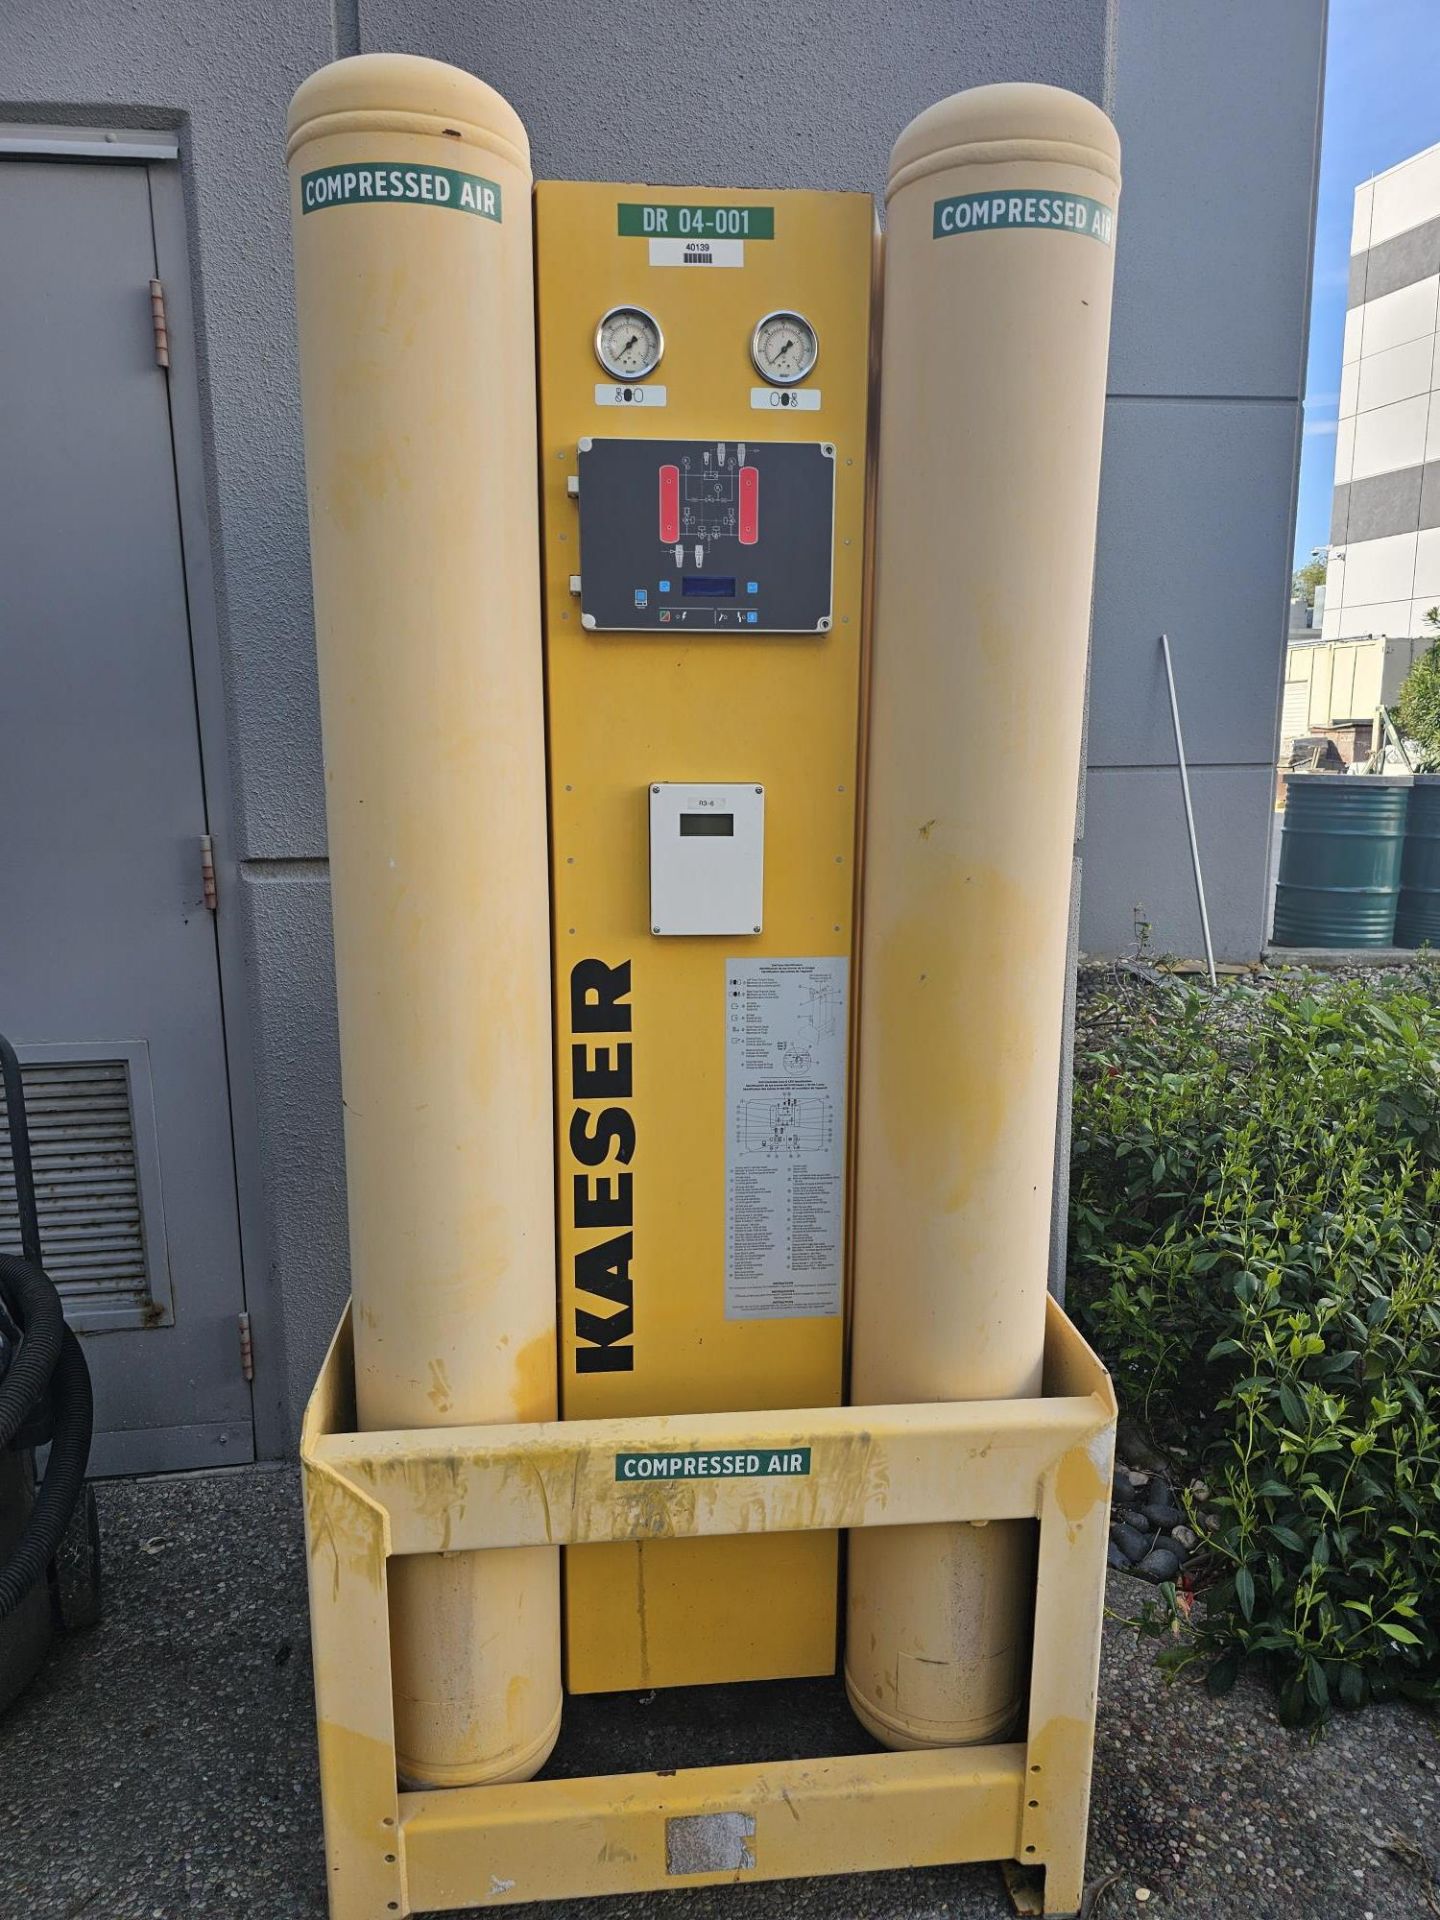 Kaeser Desiccant Compressed Air Dryer Mod. KAD-165 (SOLD AS-IS - NO WARRANTY)